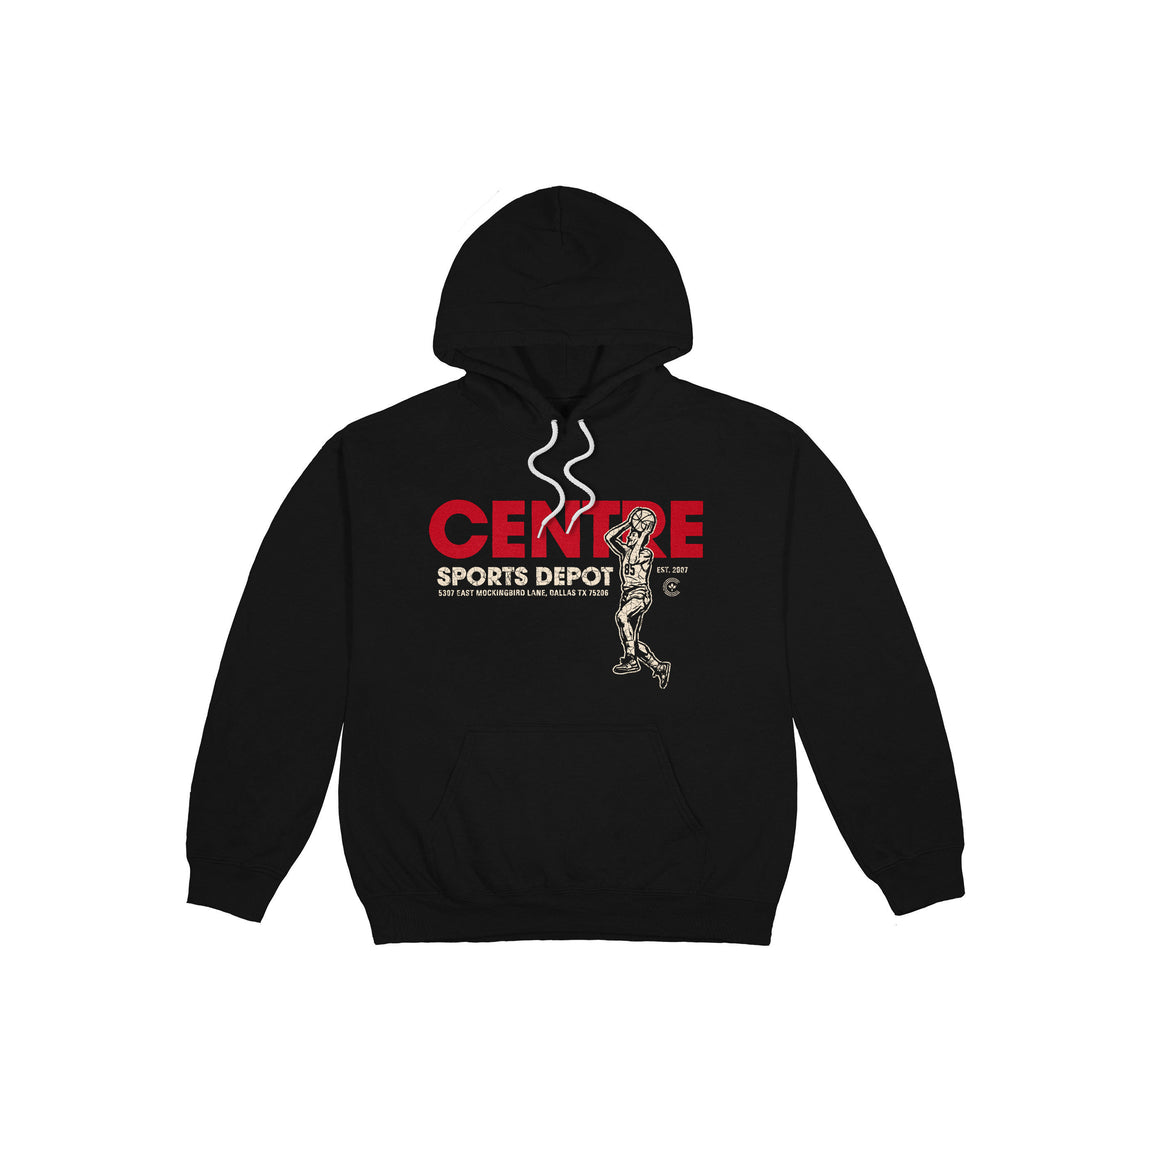 Centre Sports Depot Pullover Hoodie (Black) - Centre Sports Depot Pullover Hoodie (Black) - 